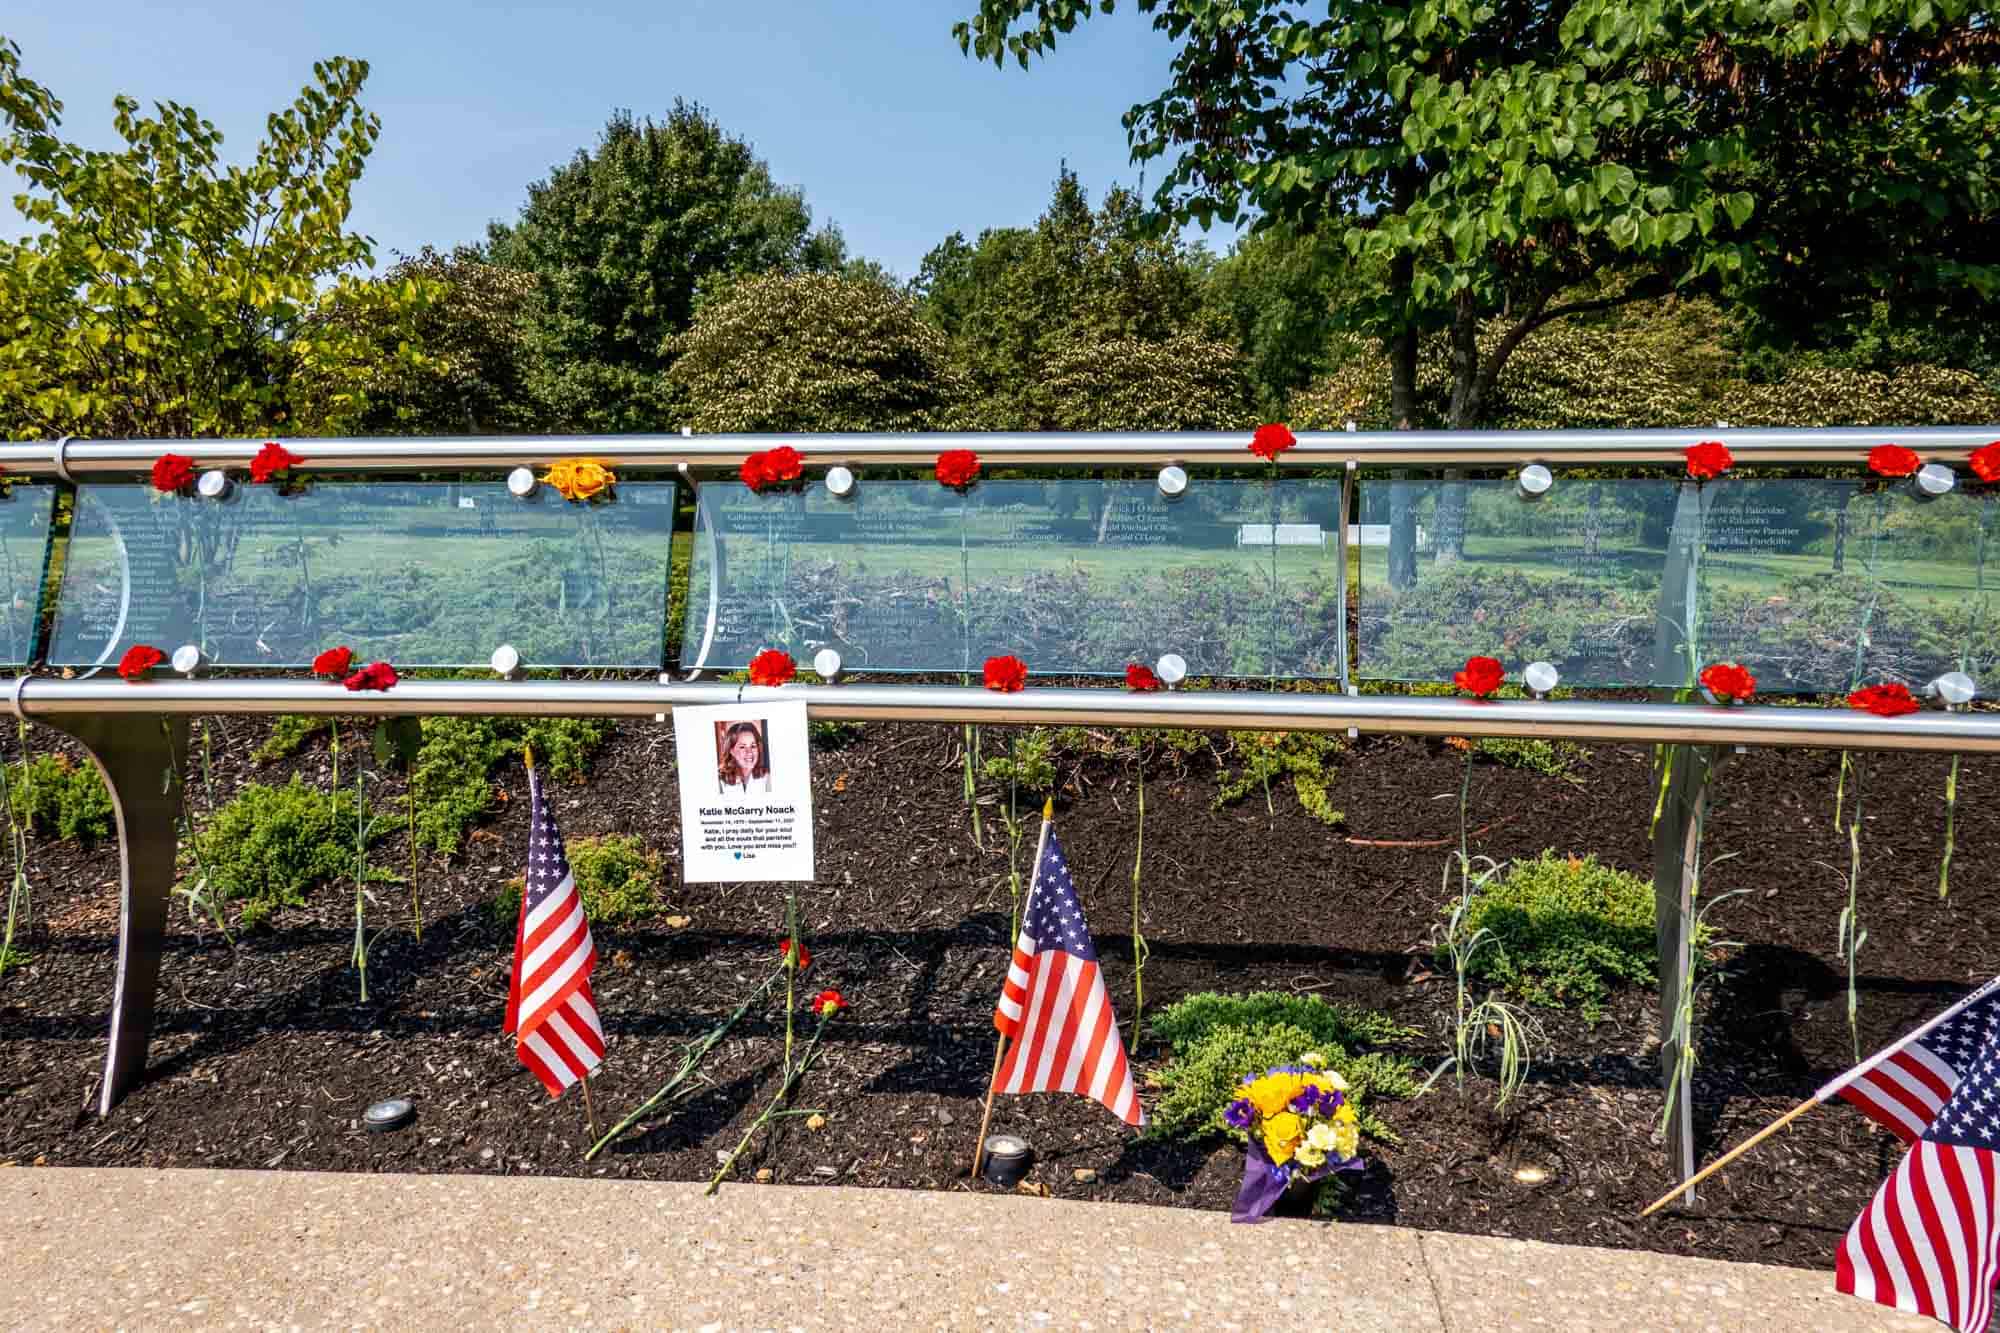 Names of those who died on September 11 carved into glass panels with flowers placed as memorials